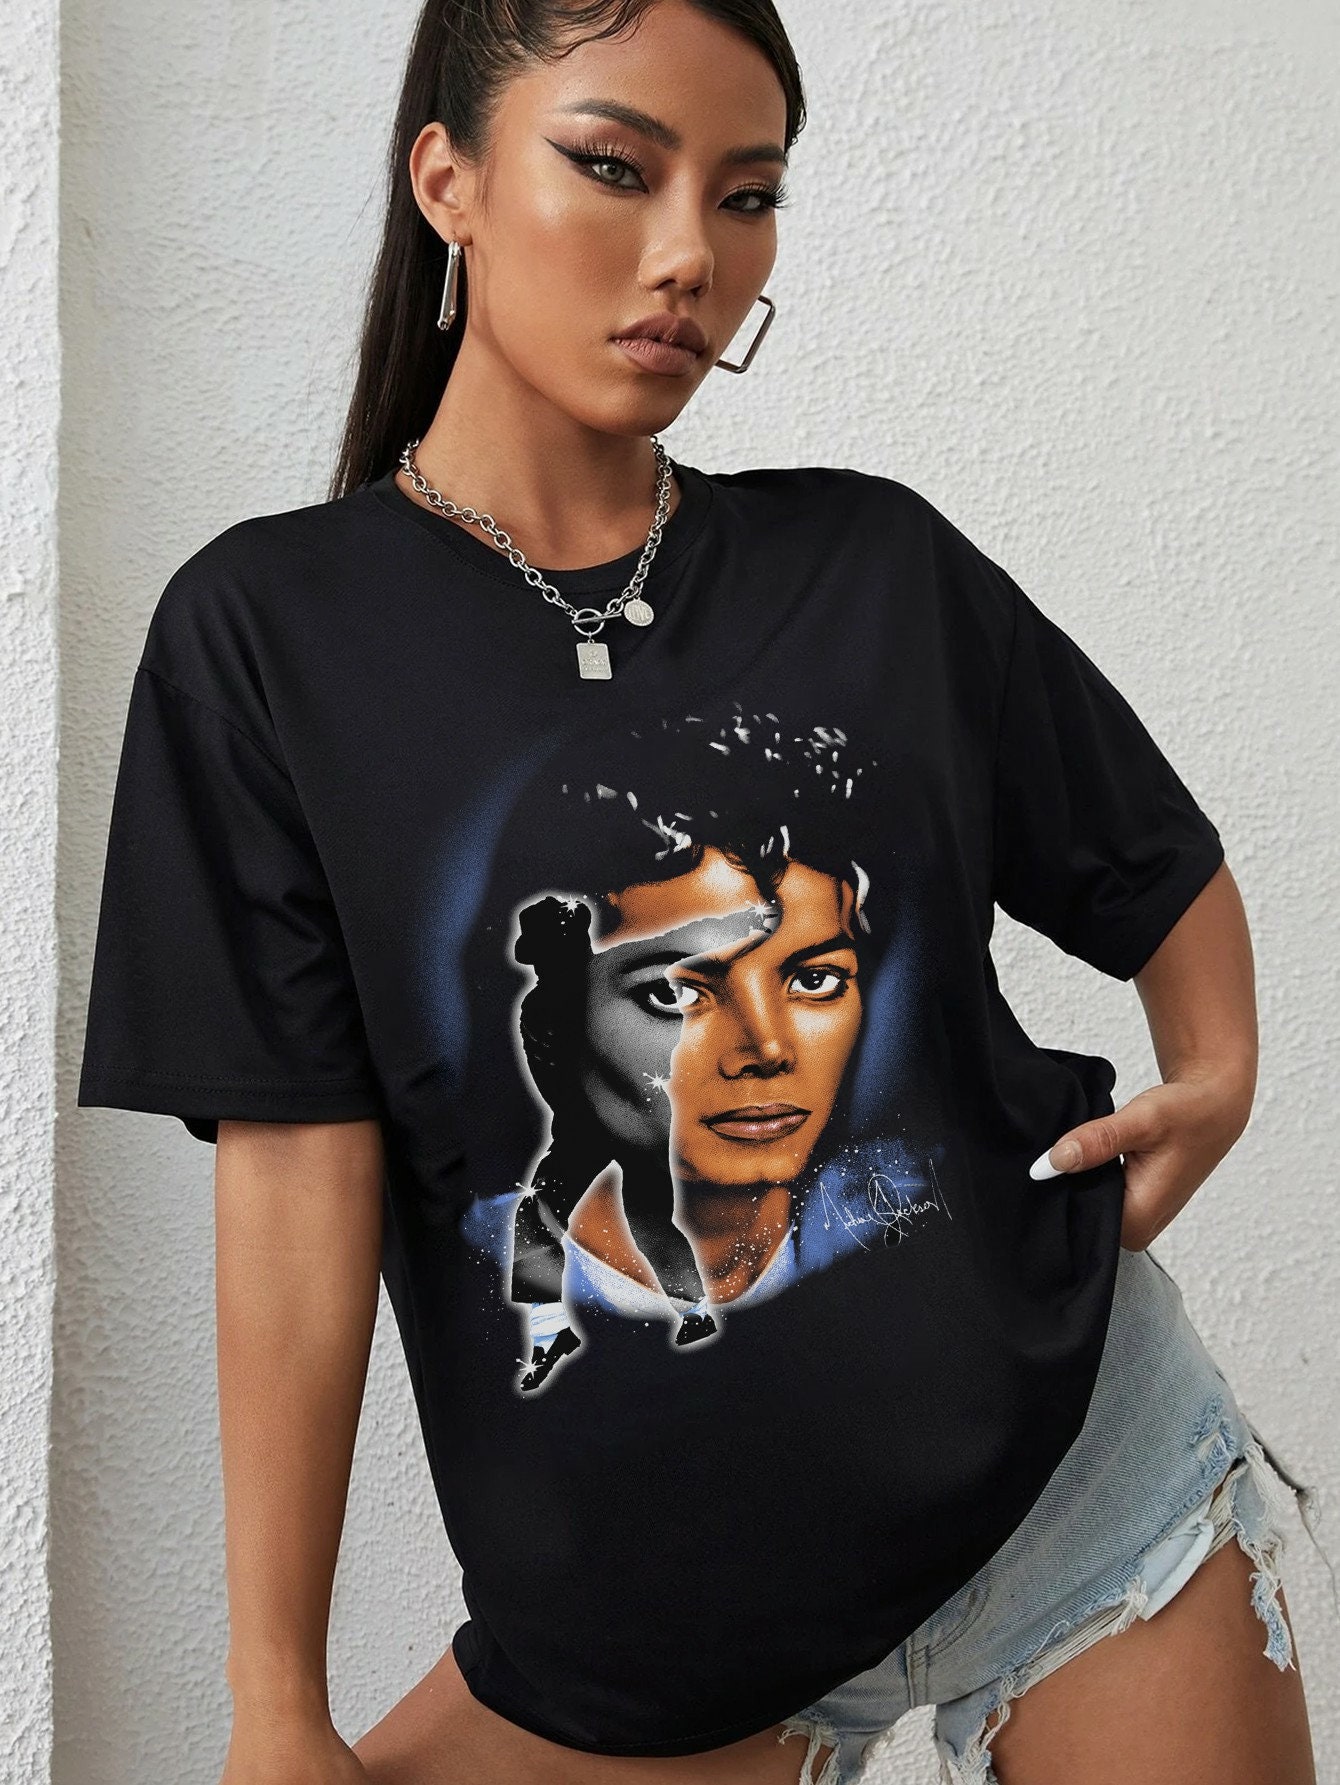 Michael Jackson Vintage 90s Tour T-Shirt - European Concerts - Single  Stitch Tee - 100% Cotton - Fits Like Small or Medium - Free Shipping